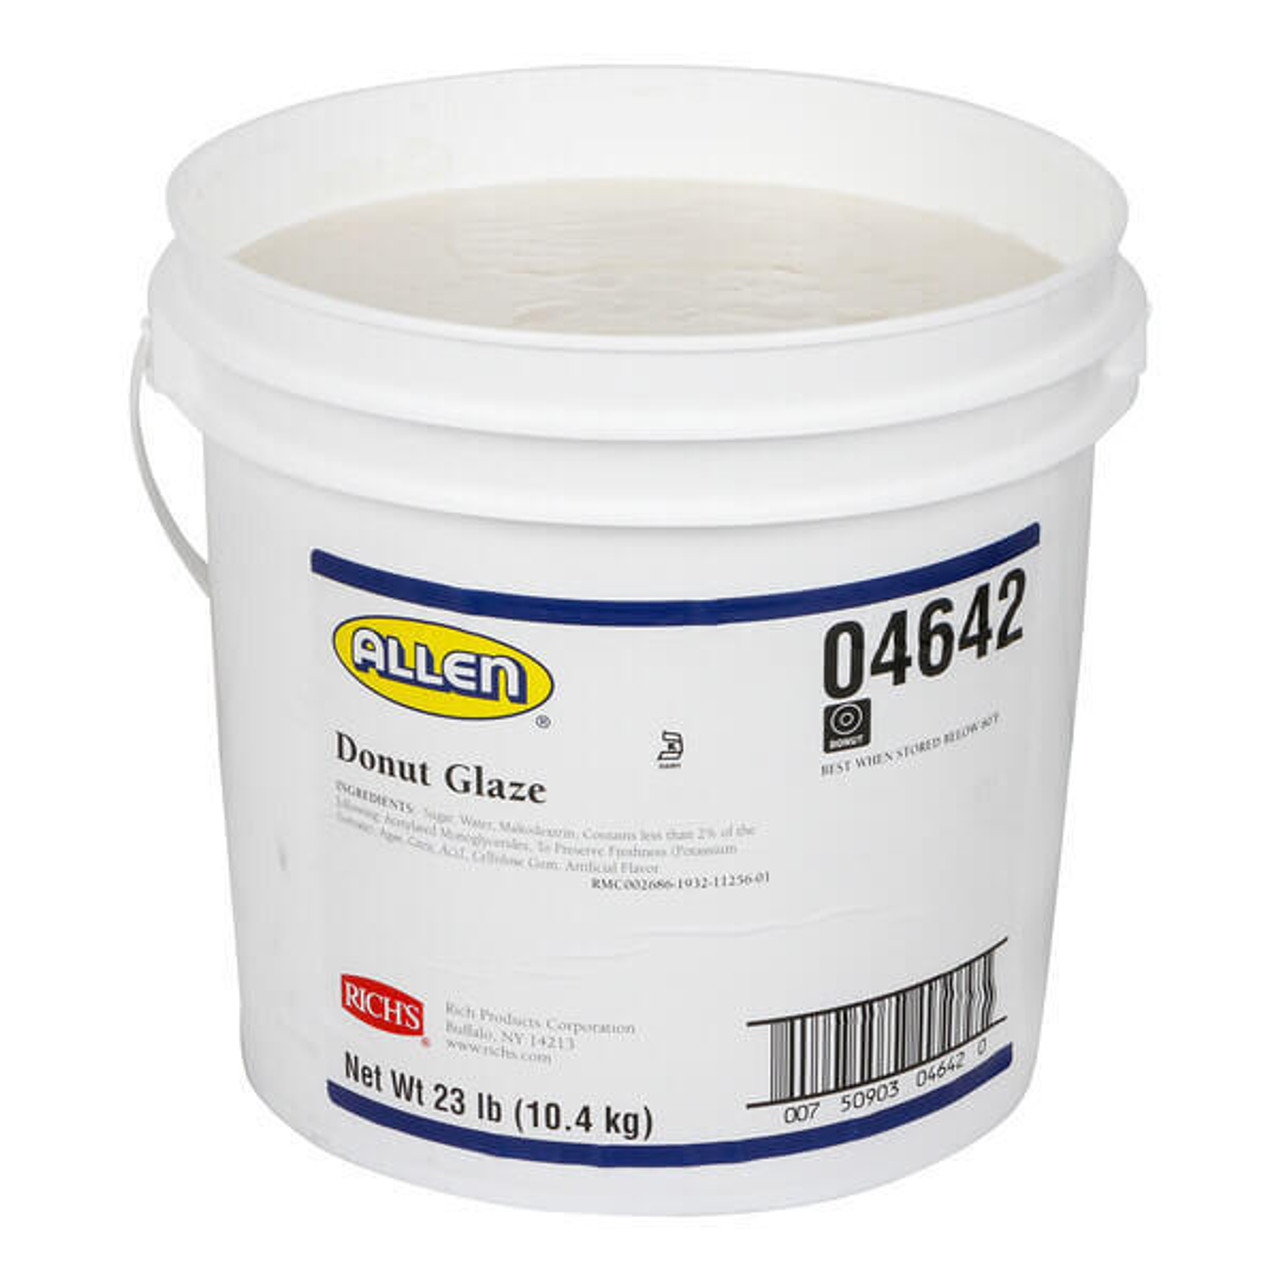  Rich's Donut Glaze - 23 lbs. Pail - Quick and Sweet Elegance for Your Pastries 